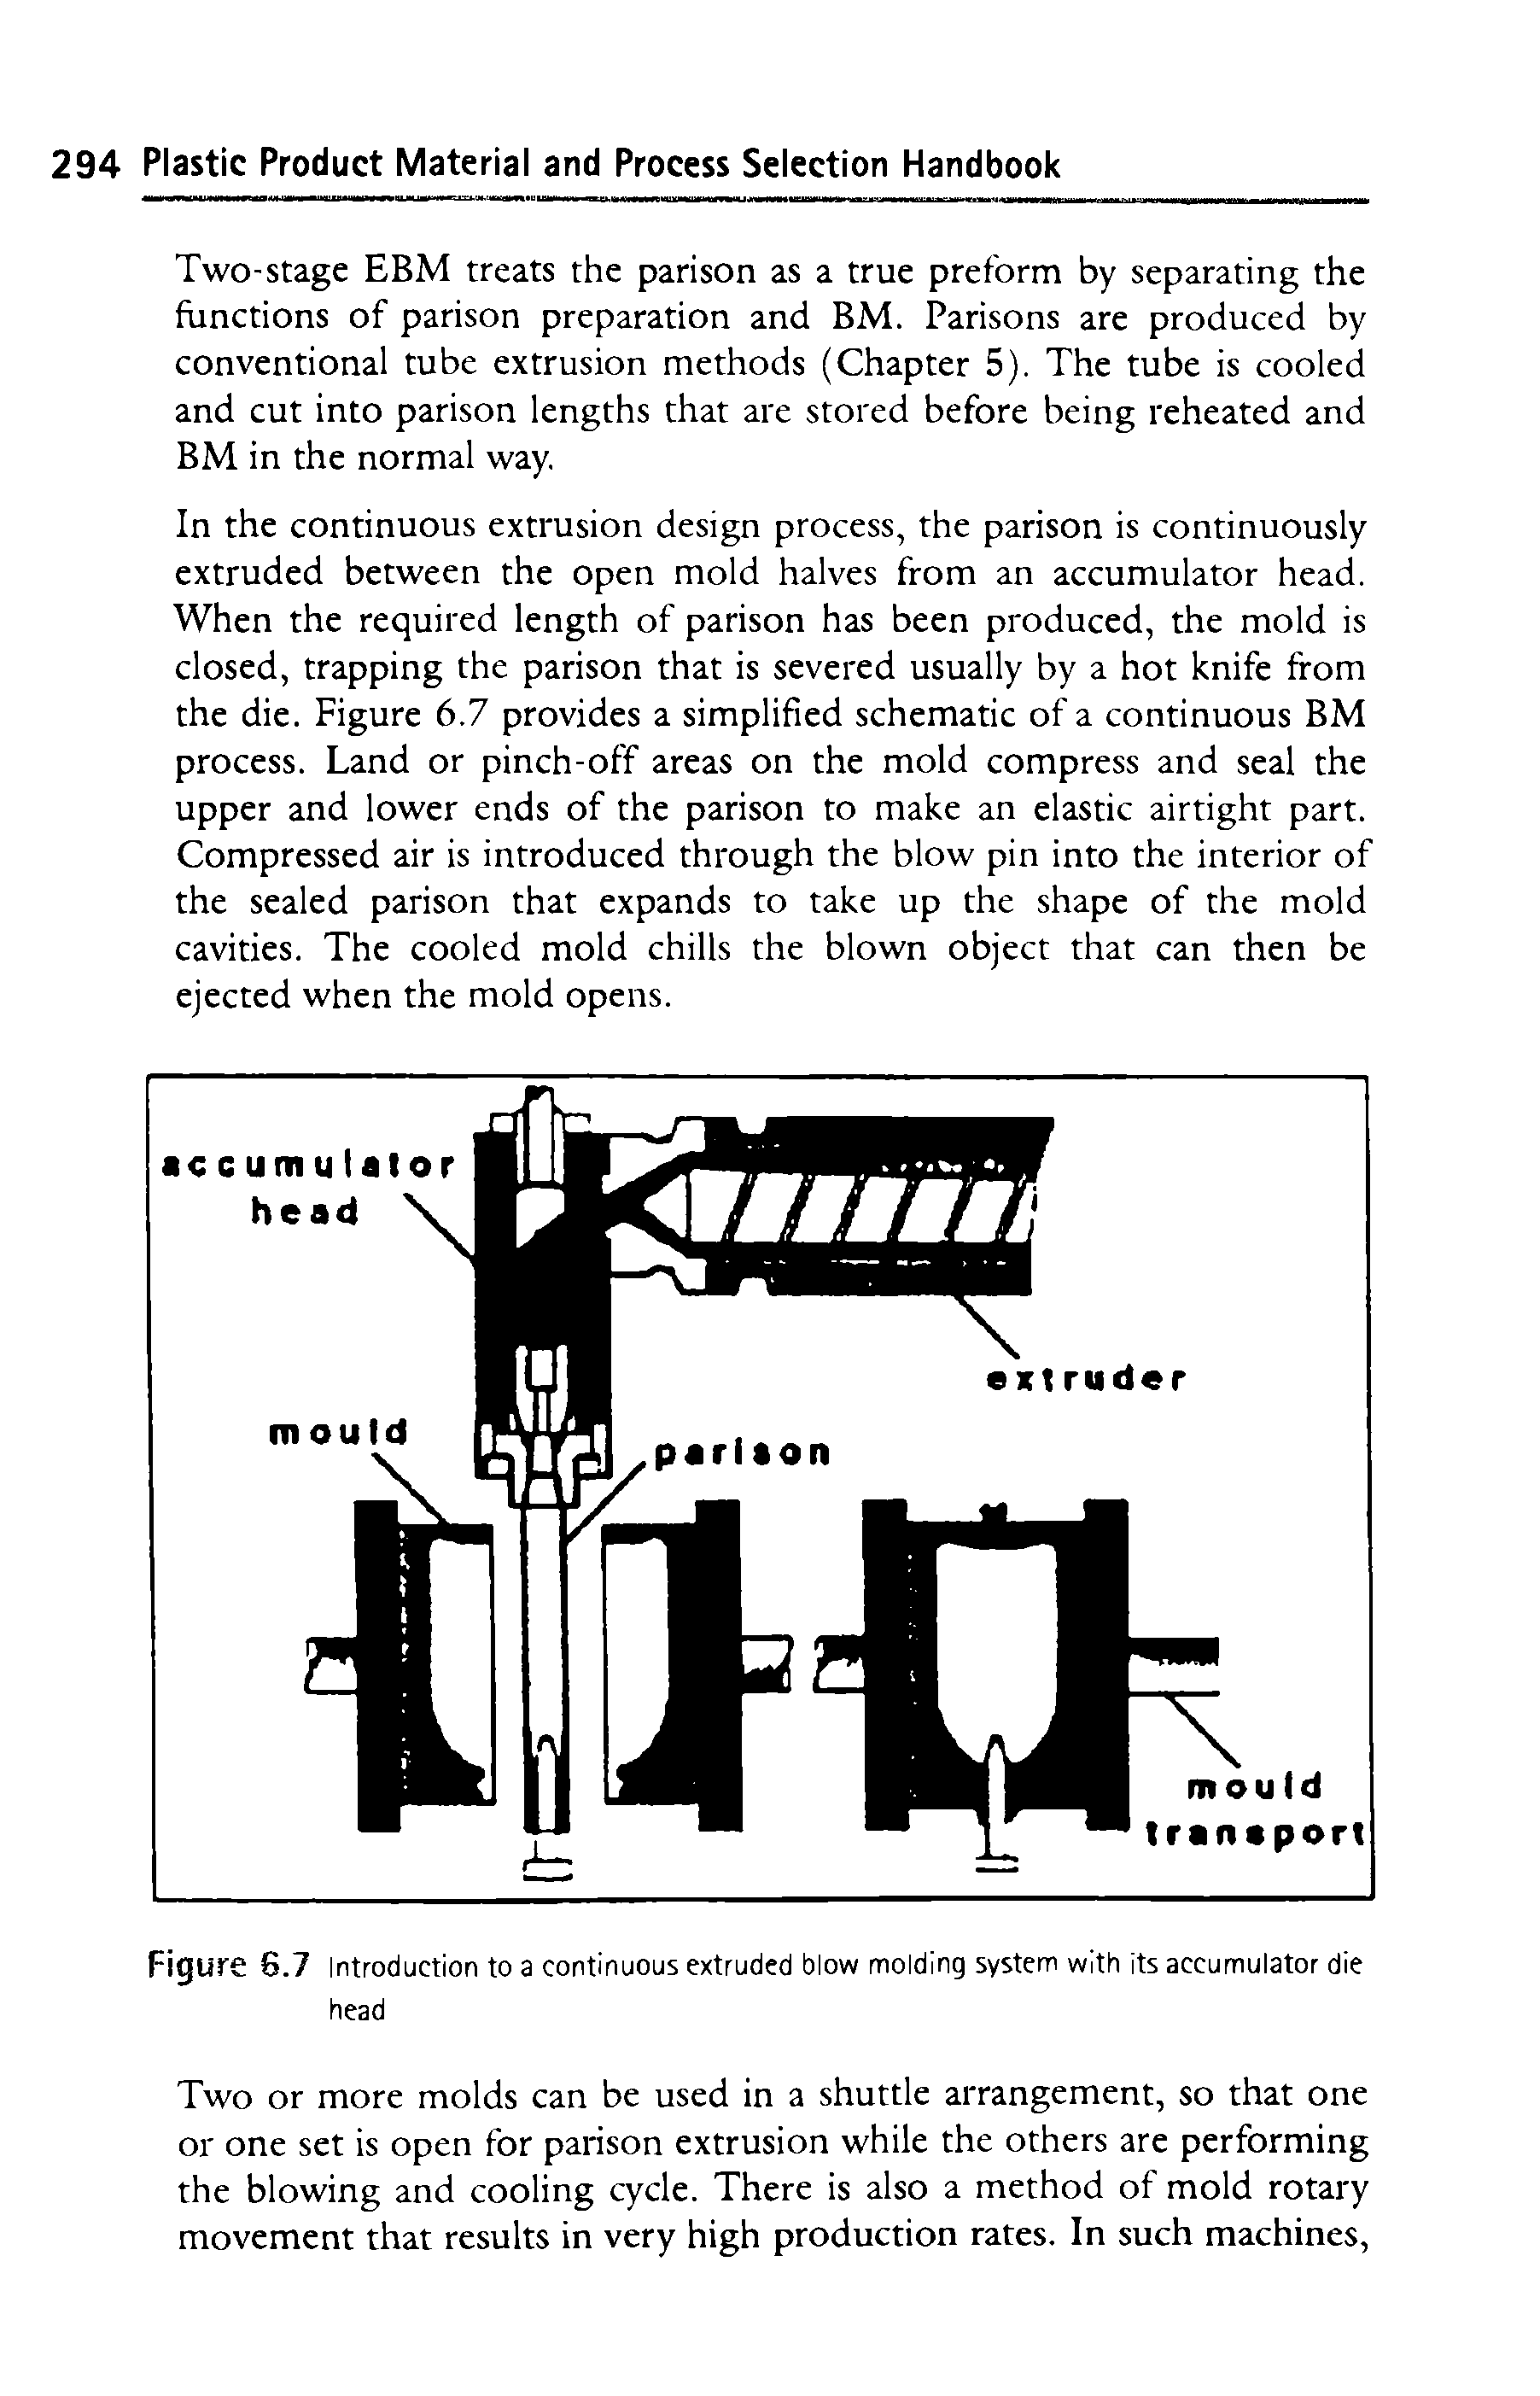 Figure S.7 Introduction to a continuous extruded blow molding system with its accumulator die head...